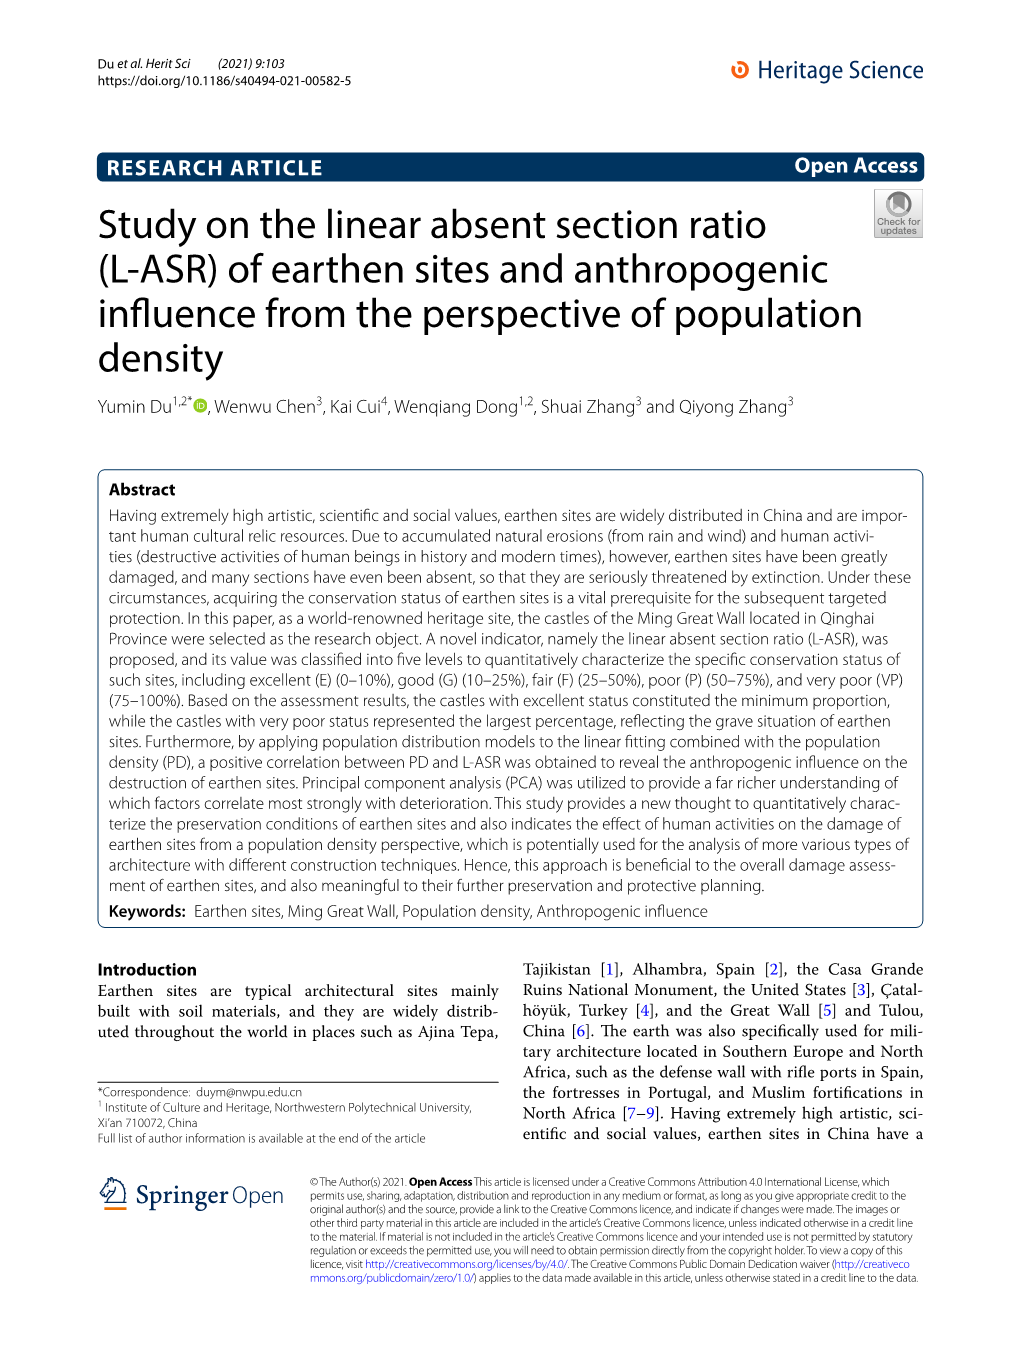 Study on the Linear Absent Section Ratio (L-ASR) of Earthen Sites And